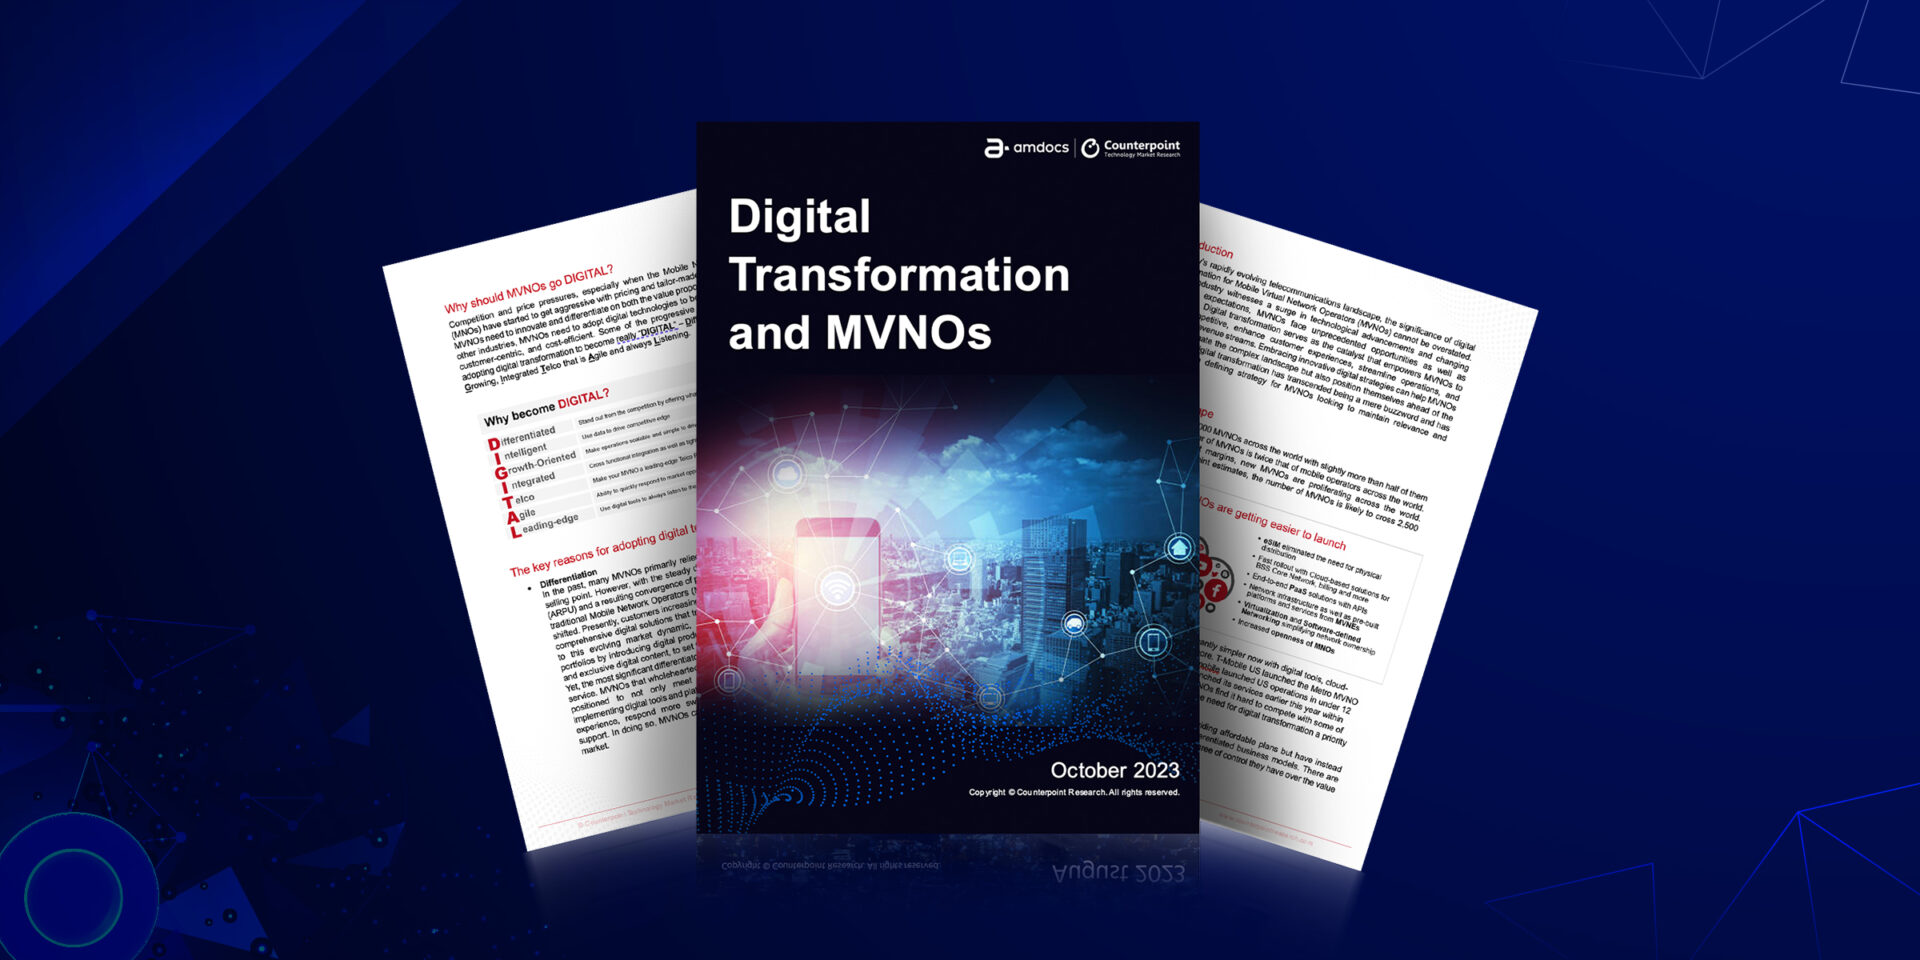 White Paper: Digital Transformation and MVNOs